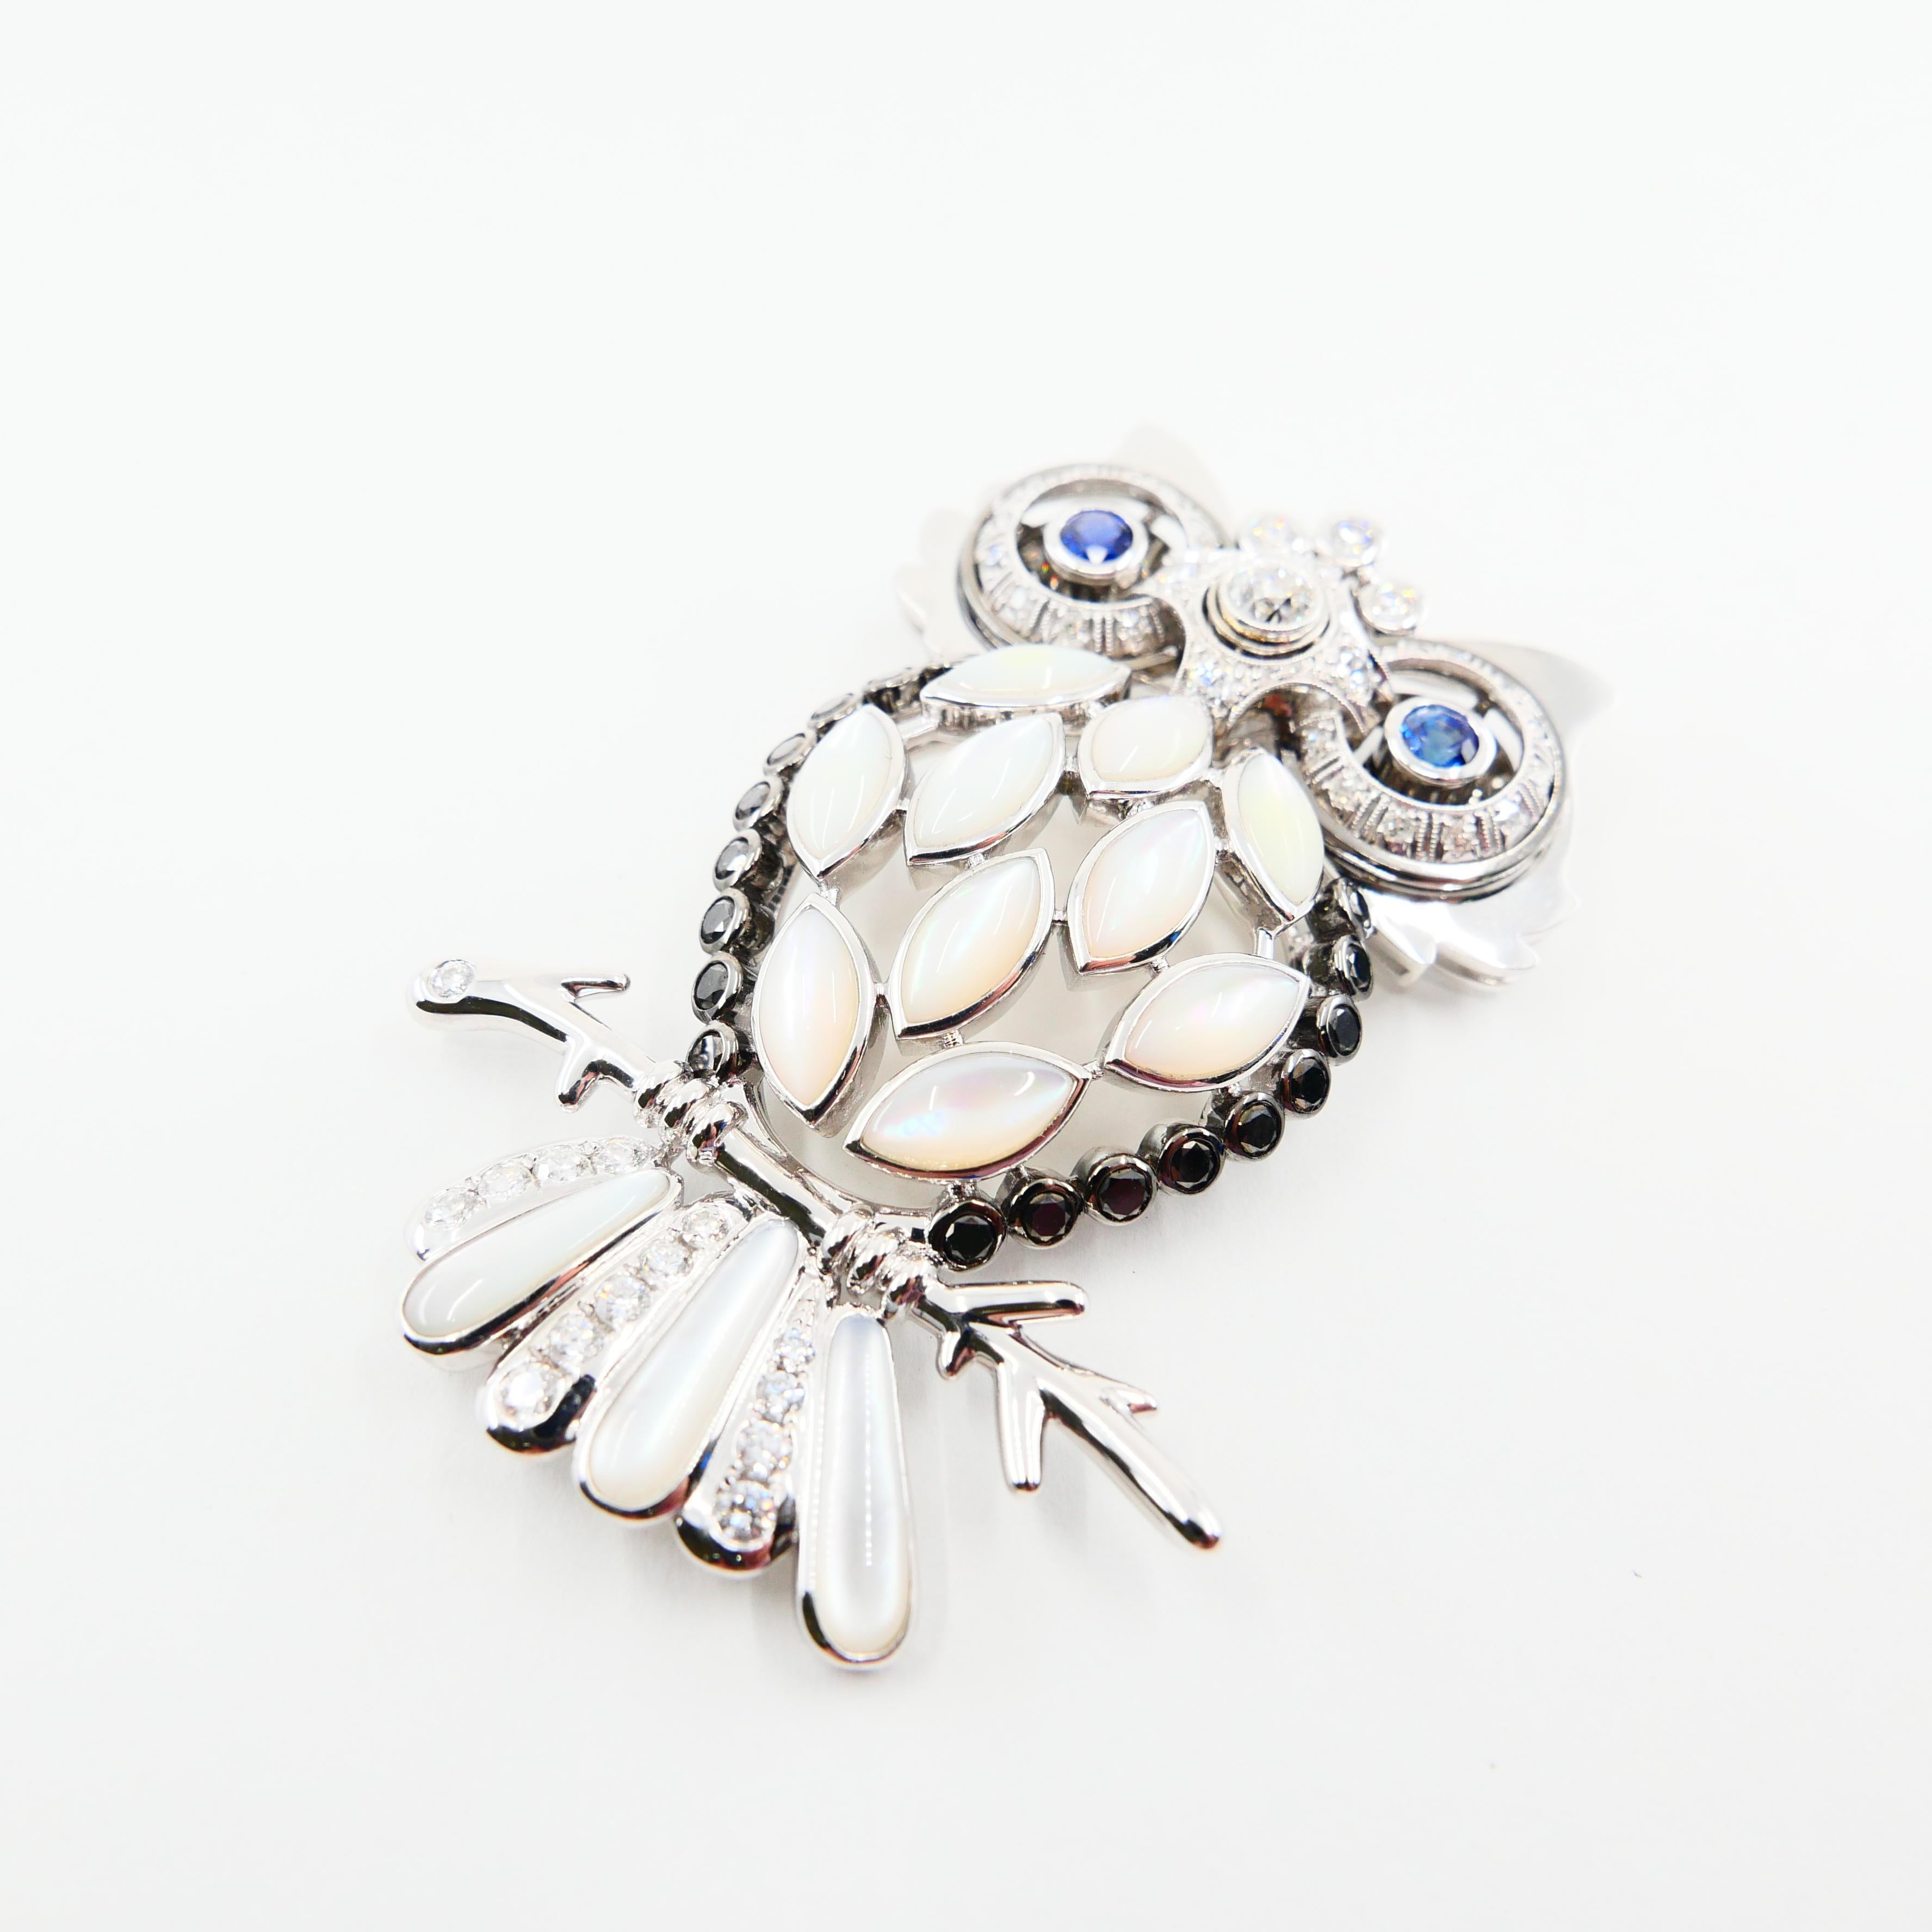 Old Mine Cut Old Cut and Black Diamonds, Sapphires, White Mother of Pearl Owl Brooch/Pendant For Sale